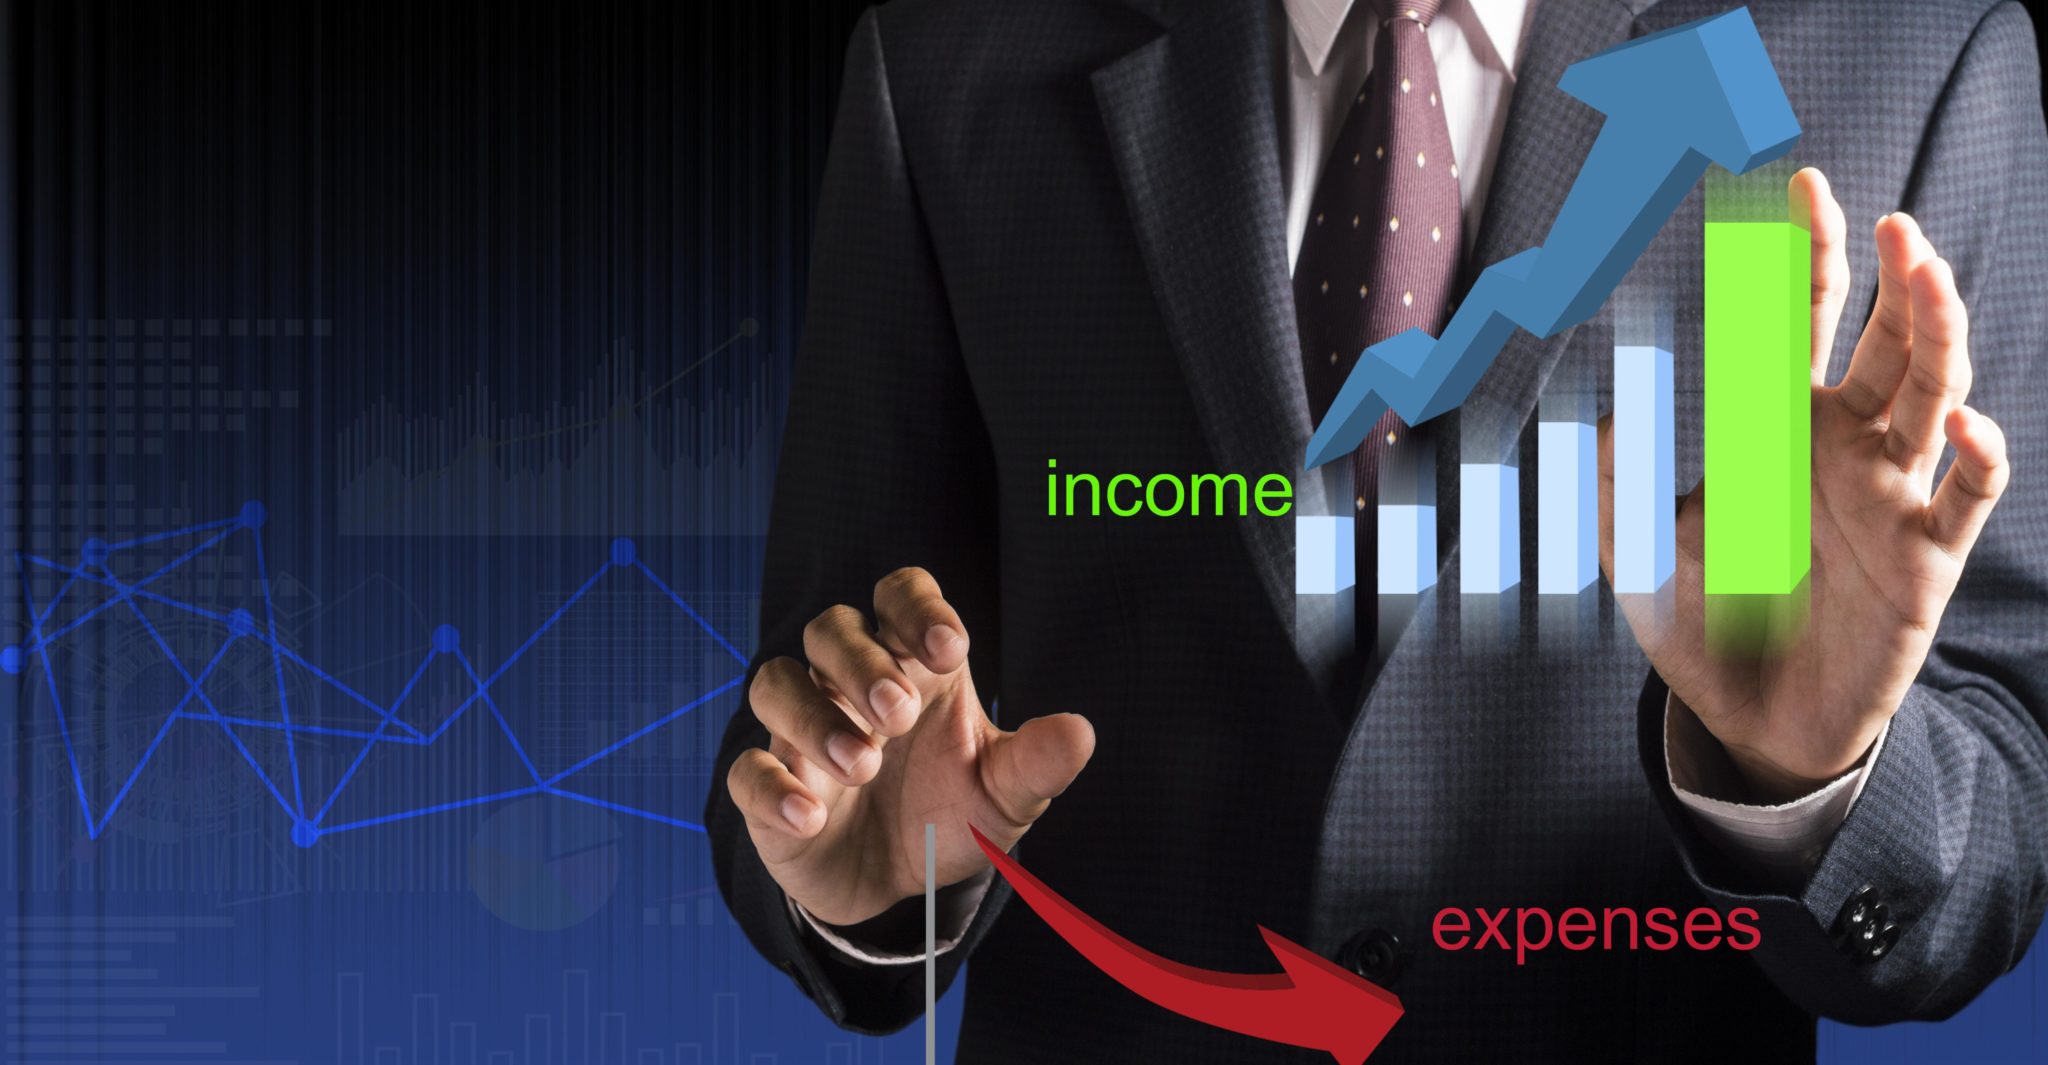 image oh a man's hand hovering near an income expense graph